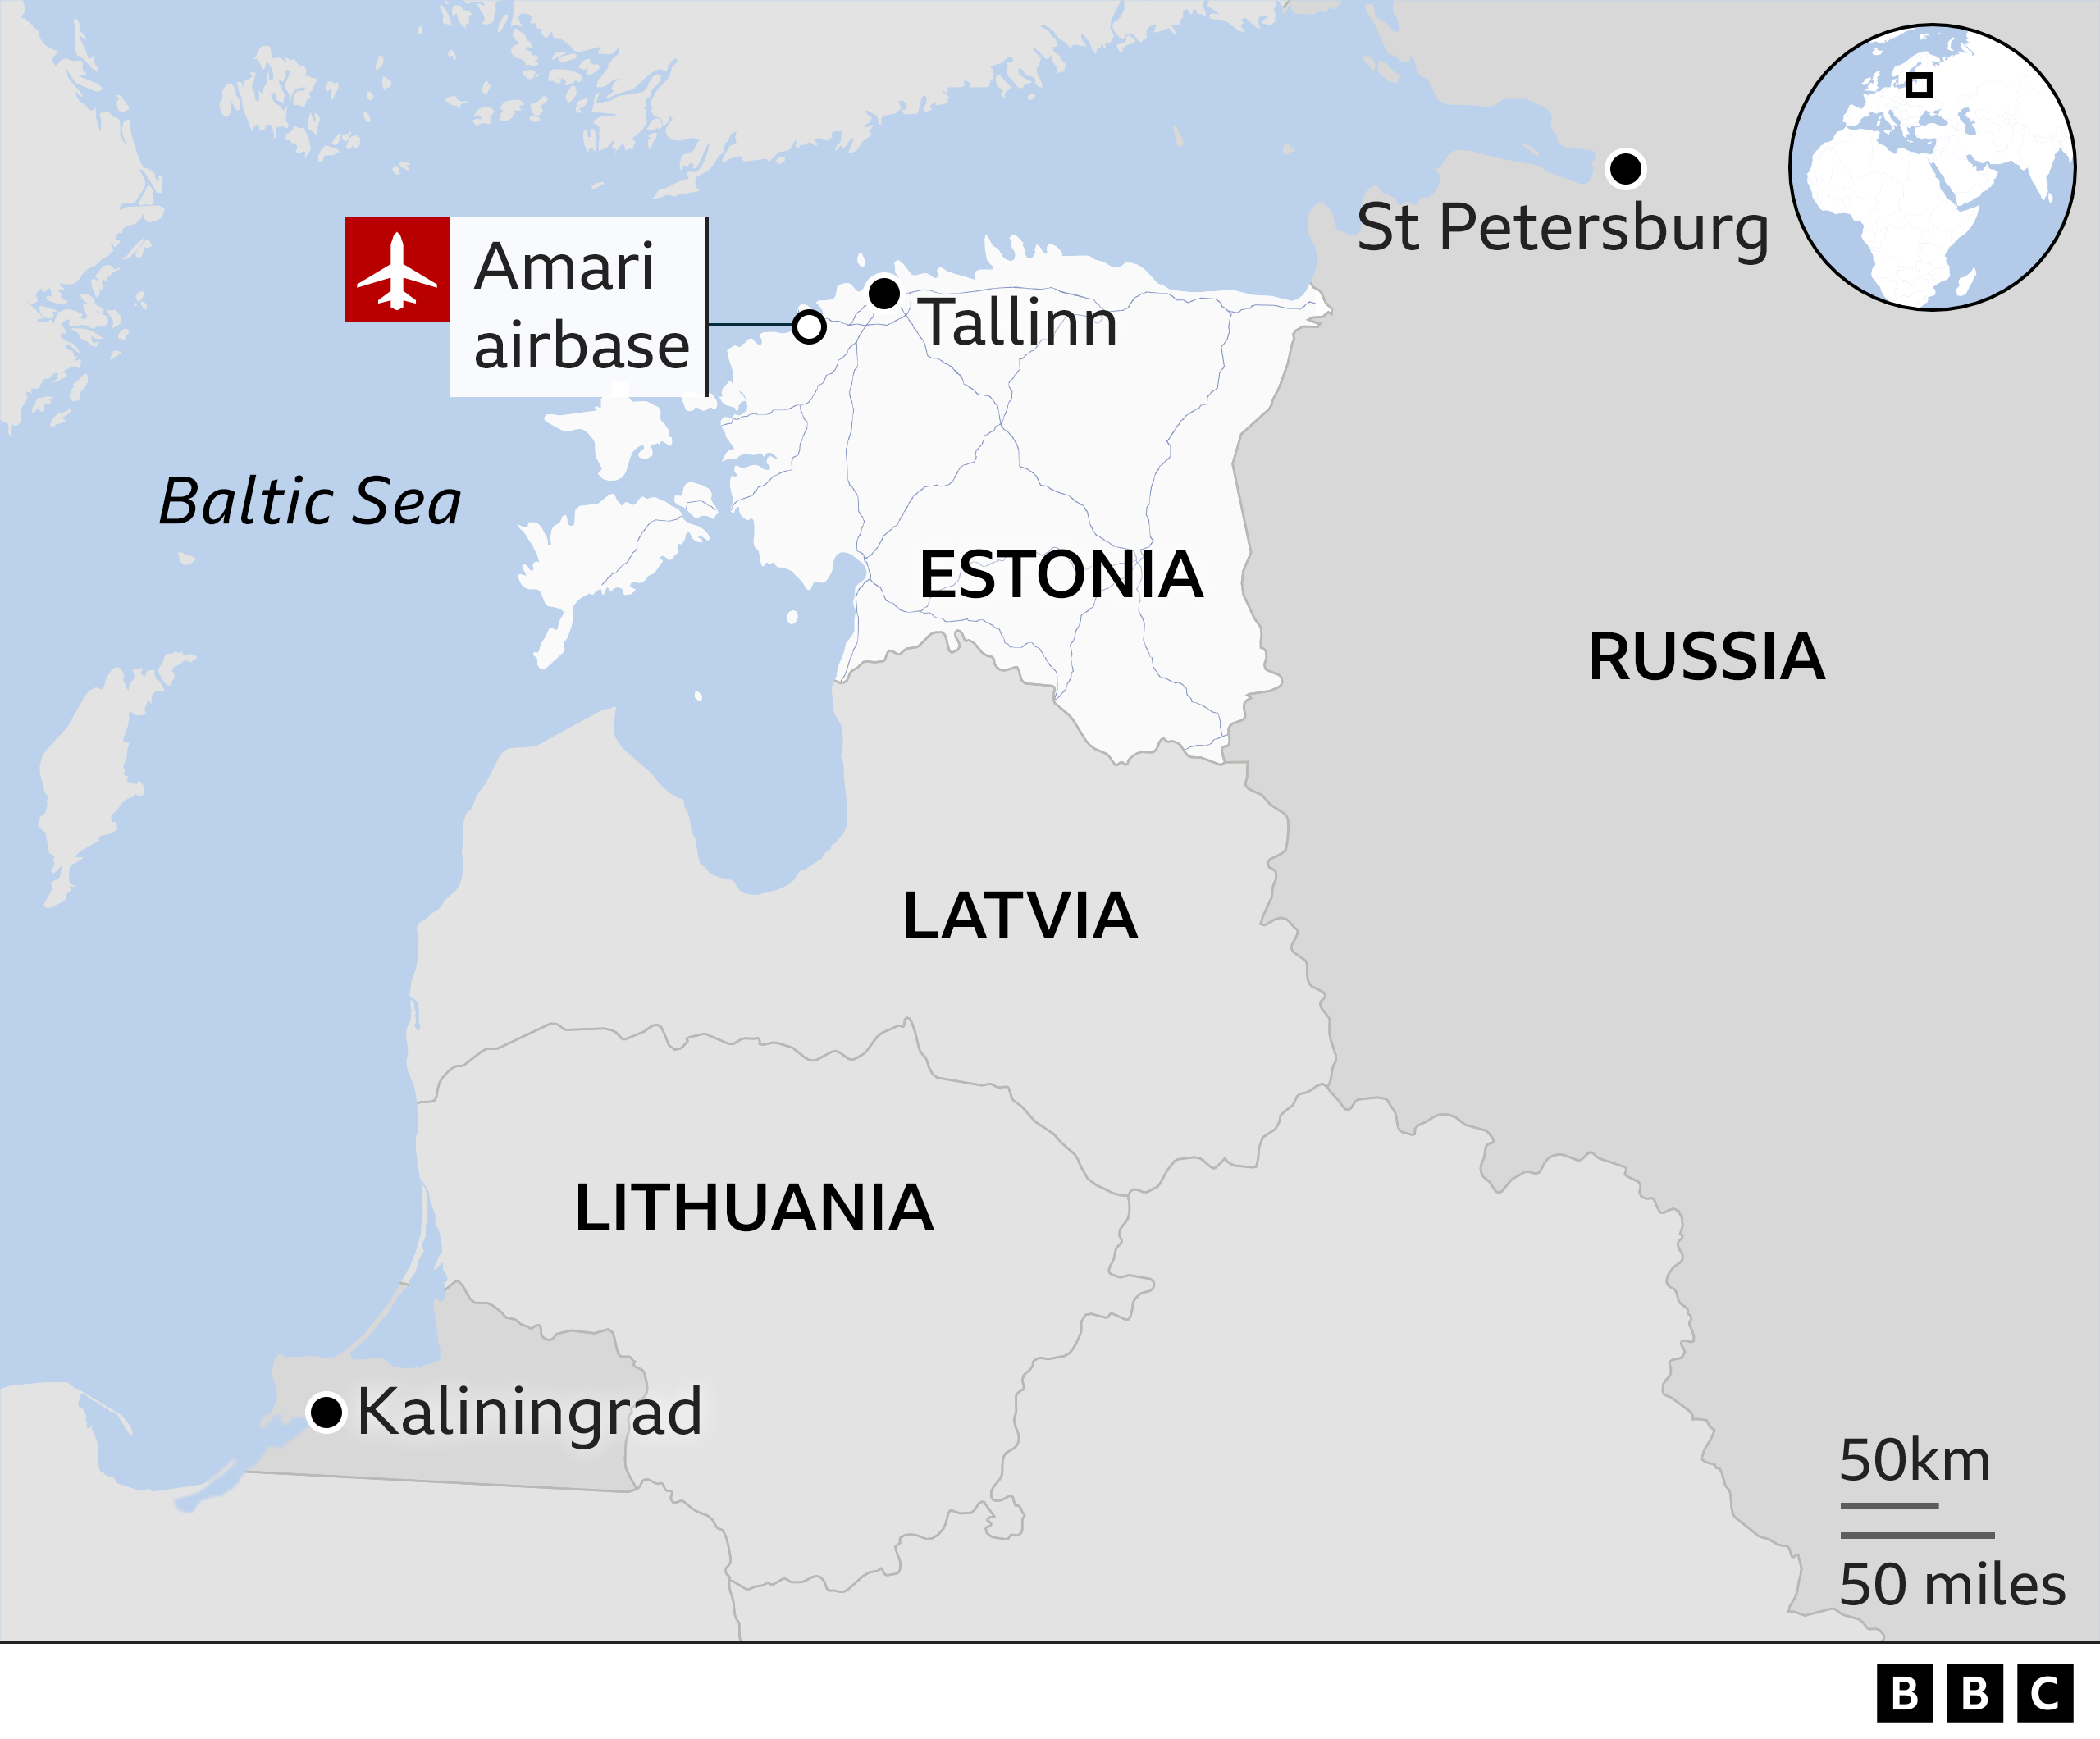 A BBC graphic showing the location of the Nato airbase